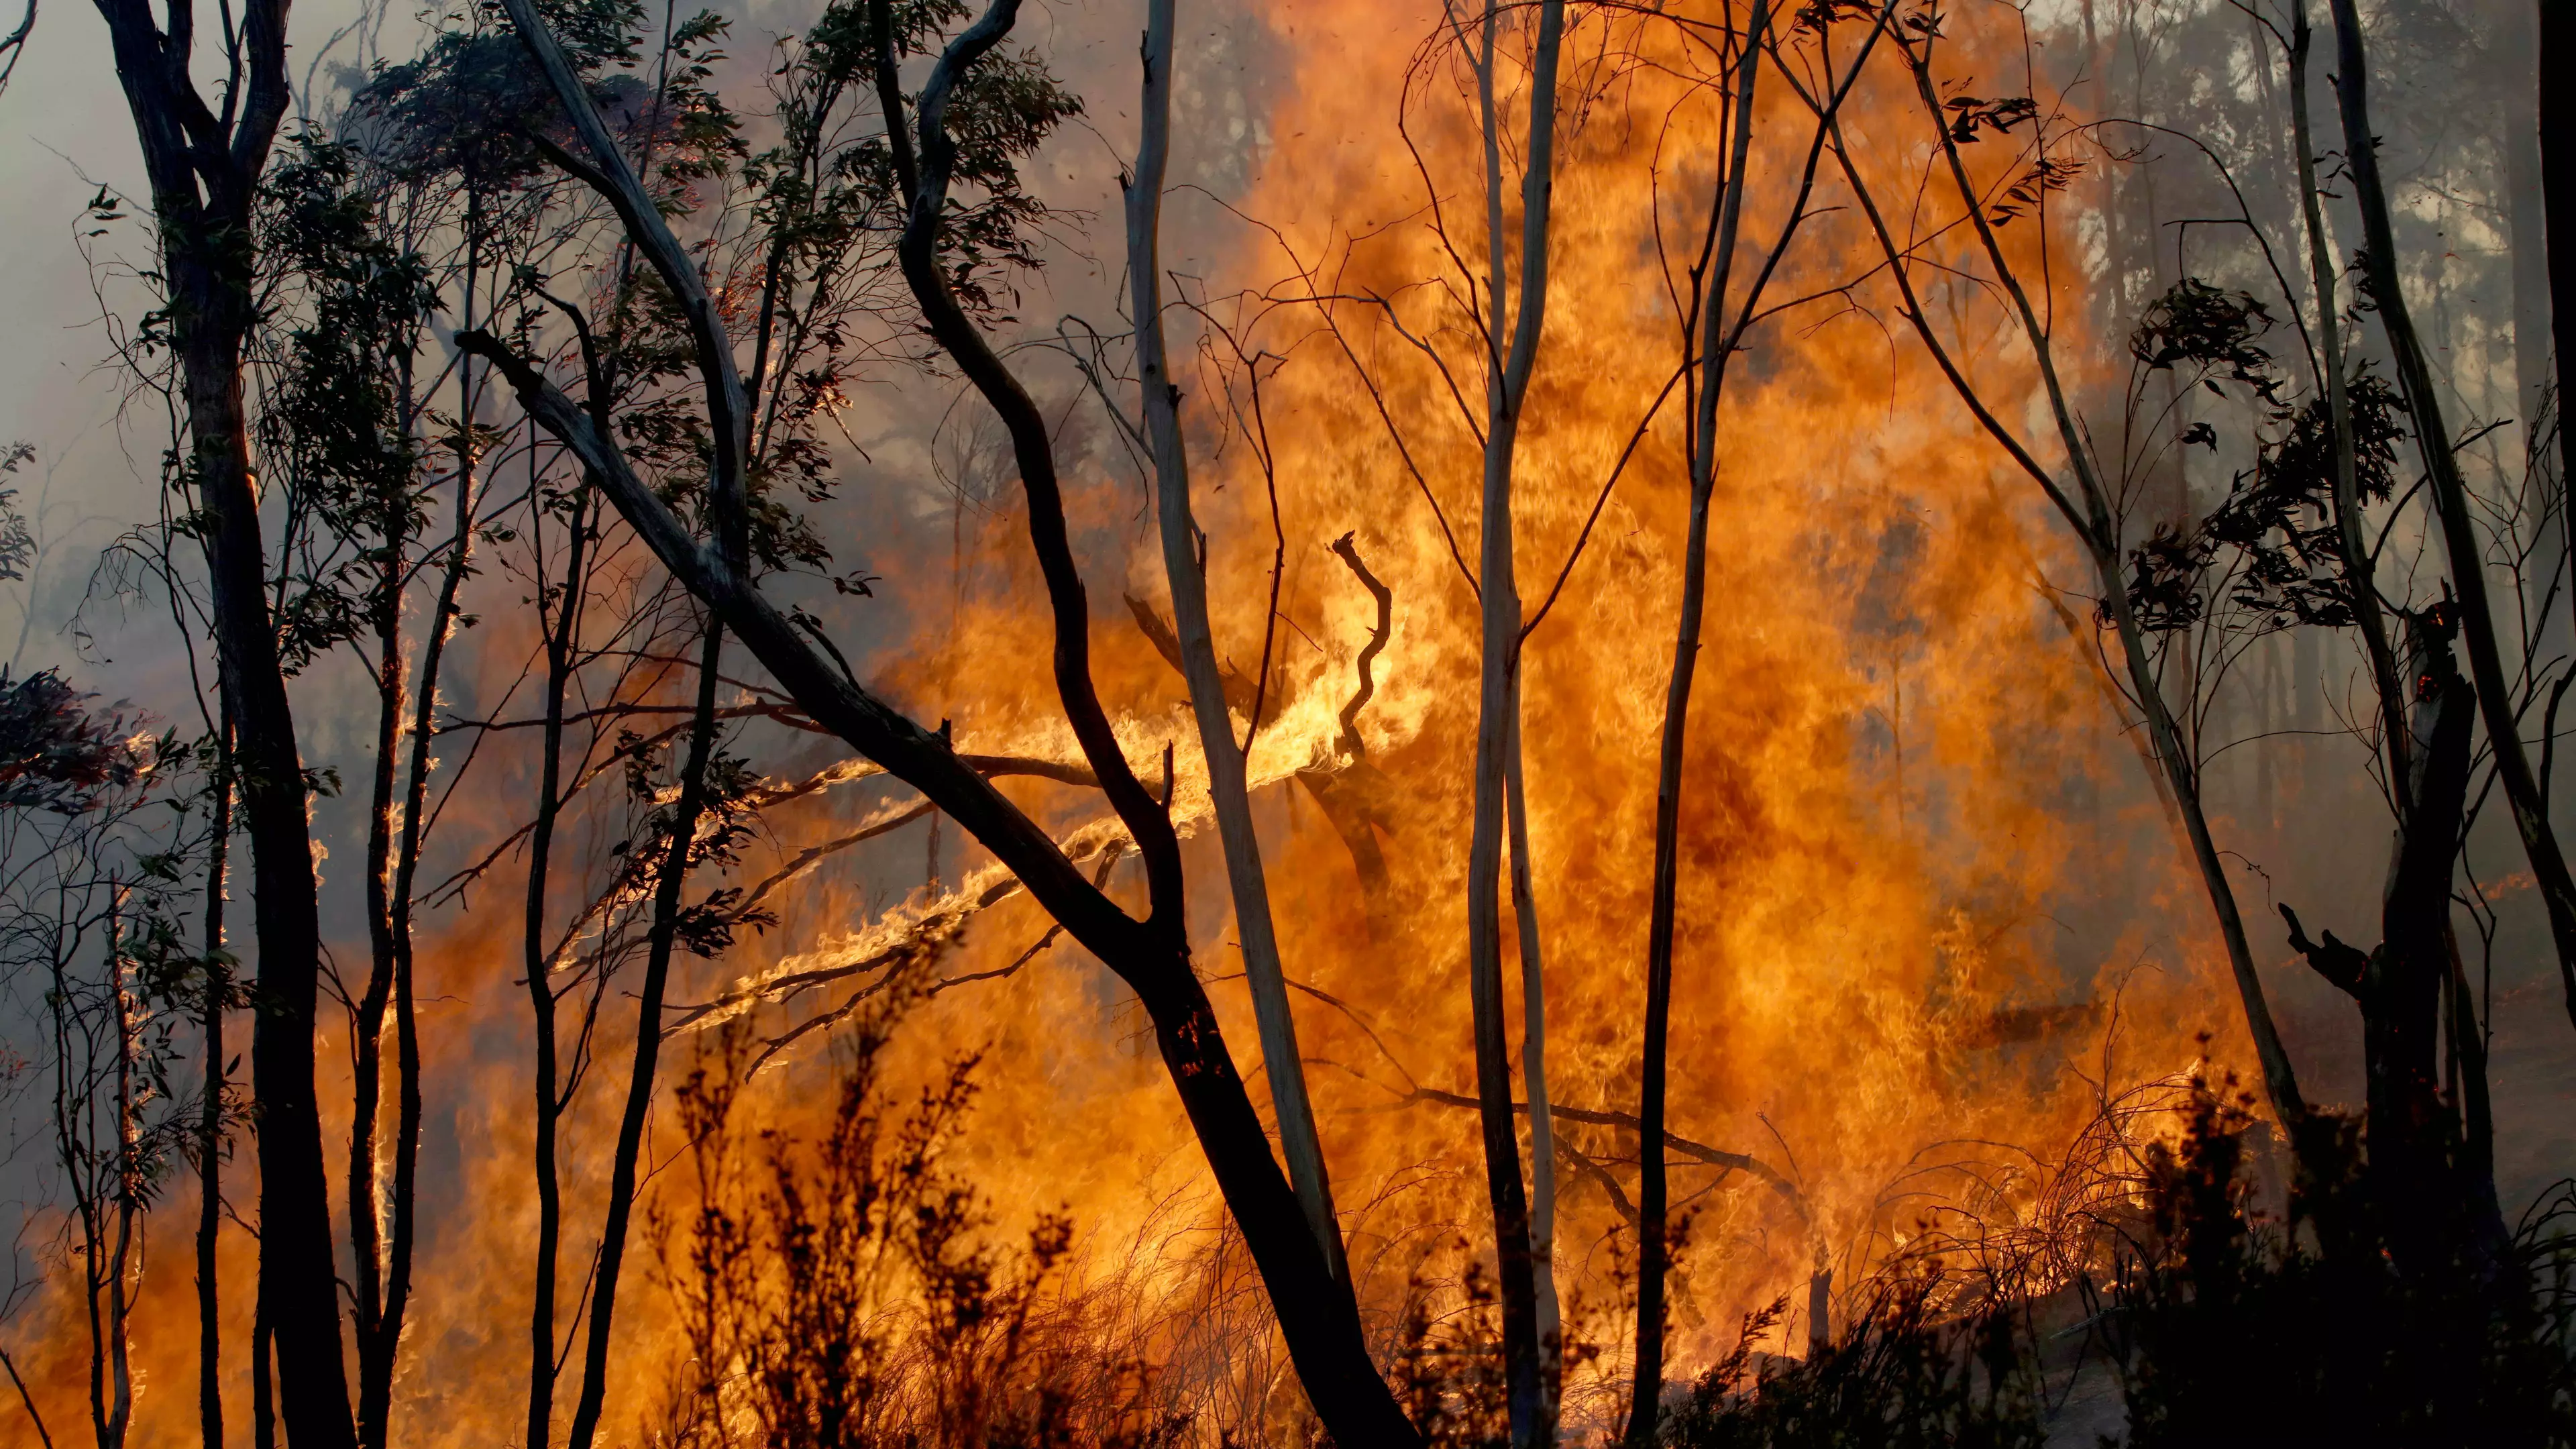 Red Cross Admits It Will Keep Some Money Donated To Bushfire Relief For 'Administration Costs'